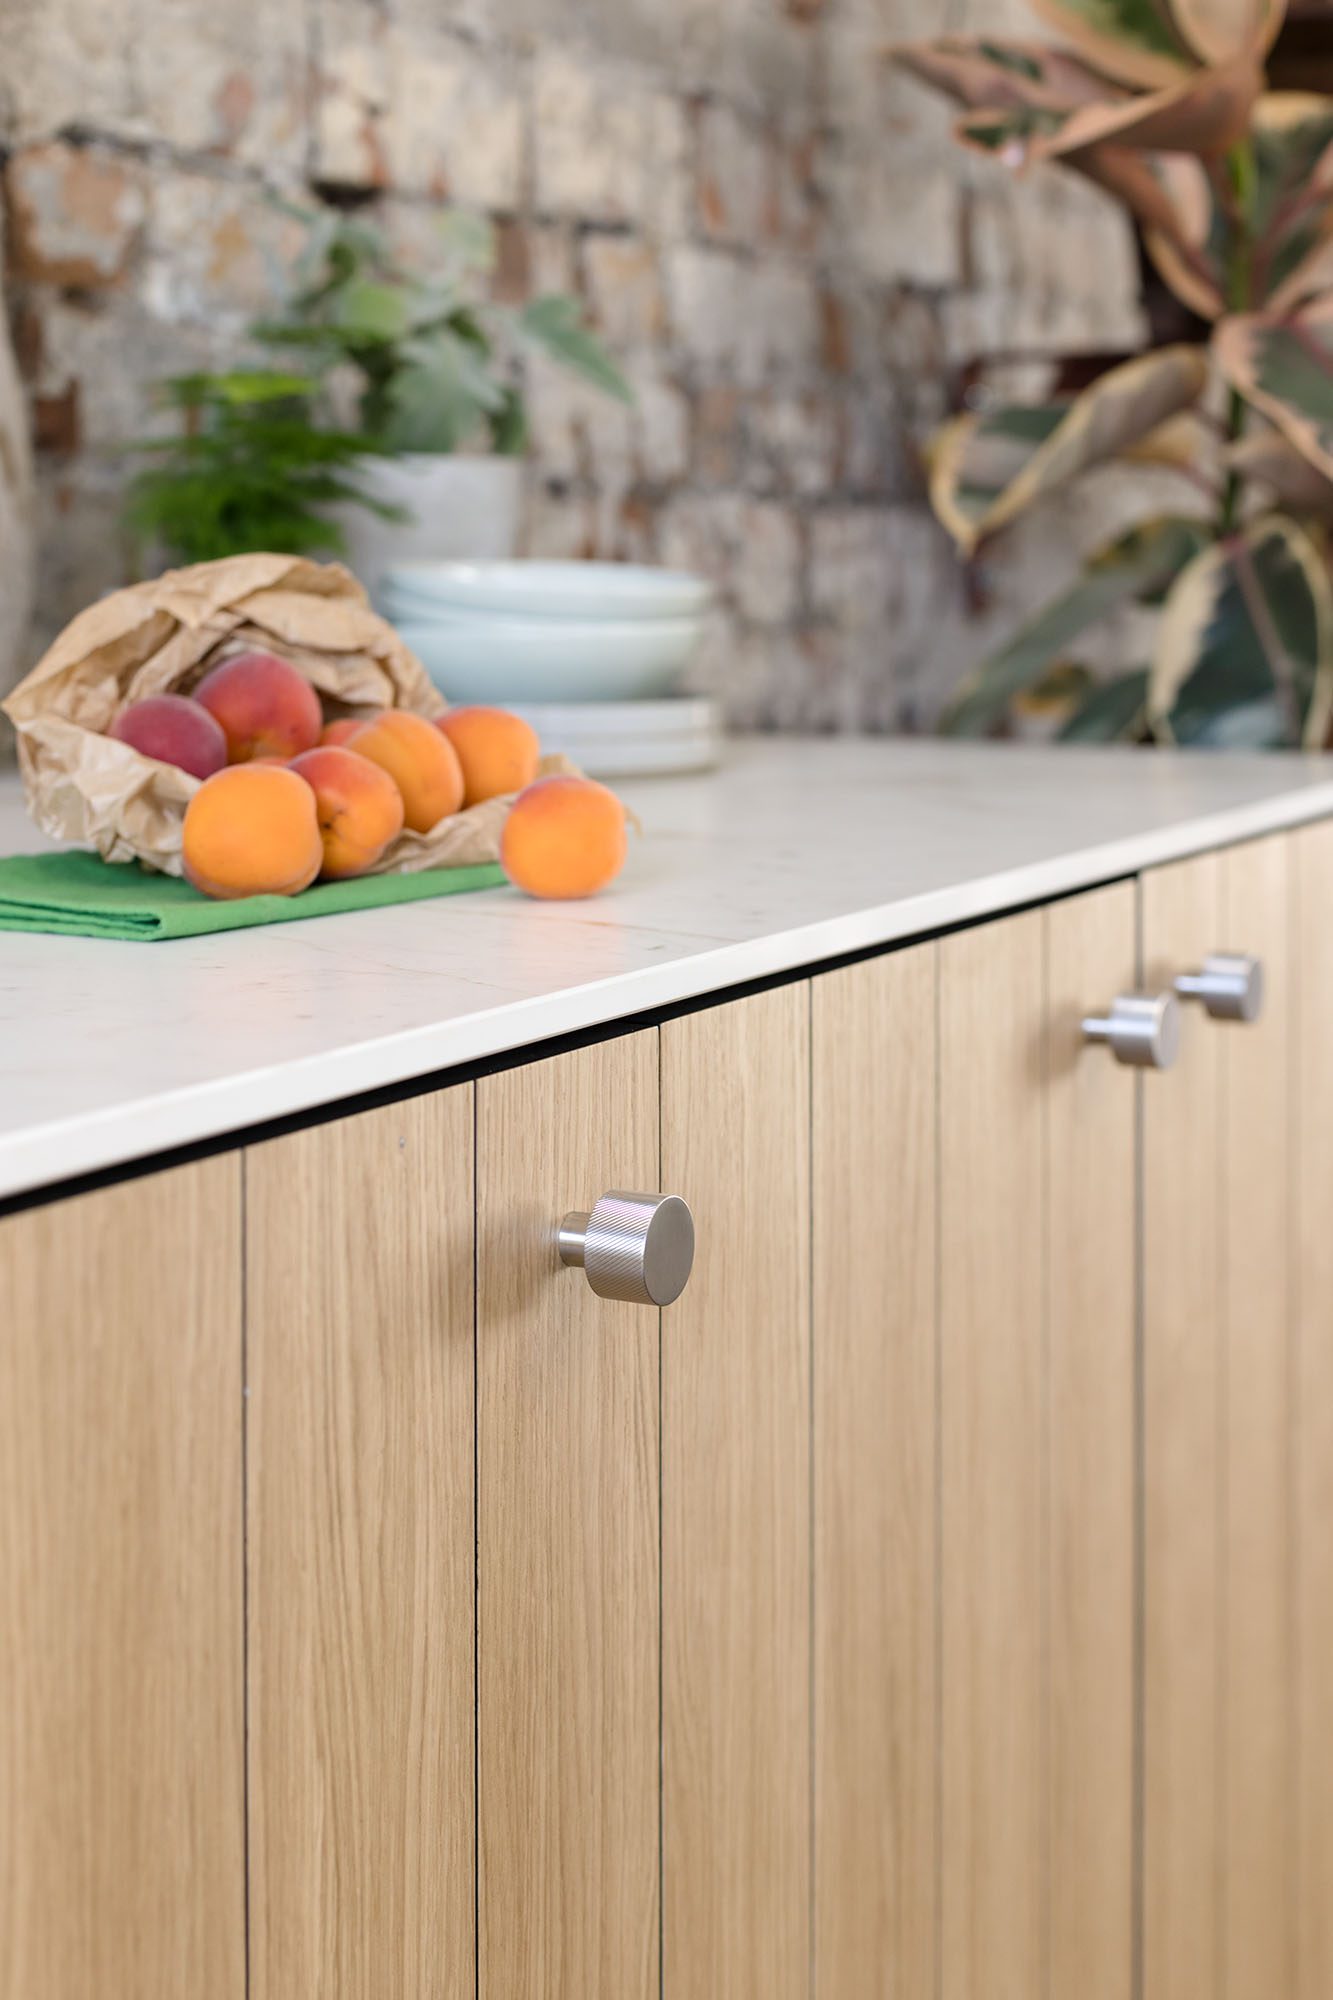 Husk's Himalayan Kitchen, which features HPL Natura Himalayan kitchen fronts and Oak V-Groove panelling.